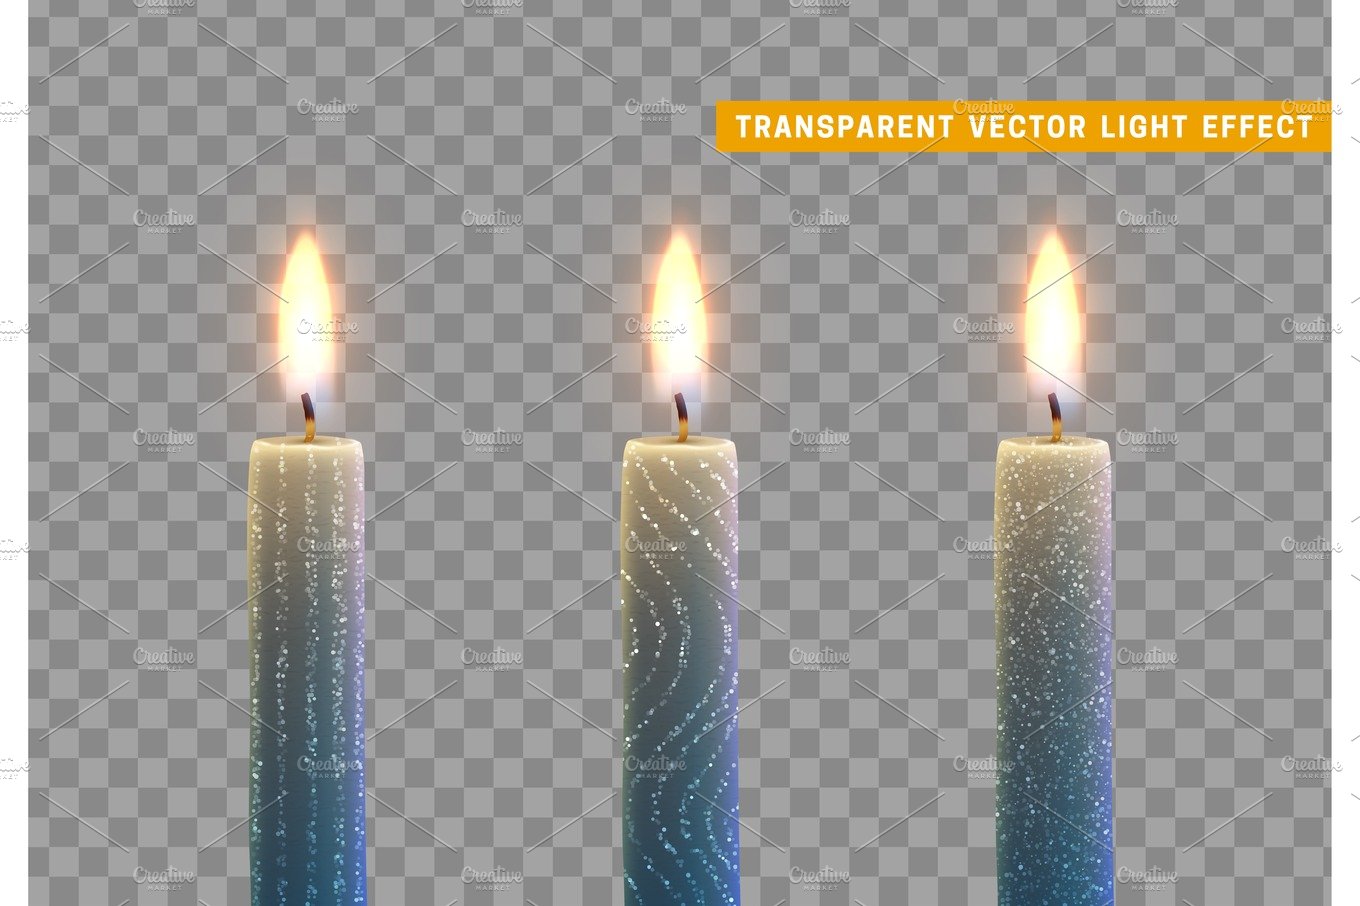 Candles burn with fire. Set of paraffin candles realistic isolated on trans... cover image.